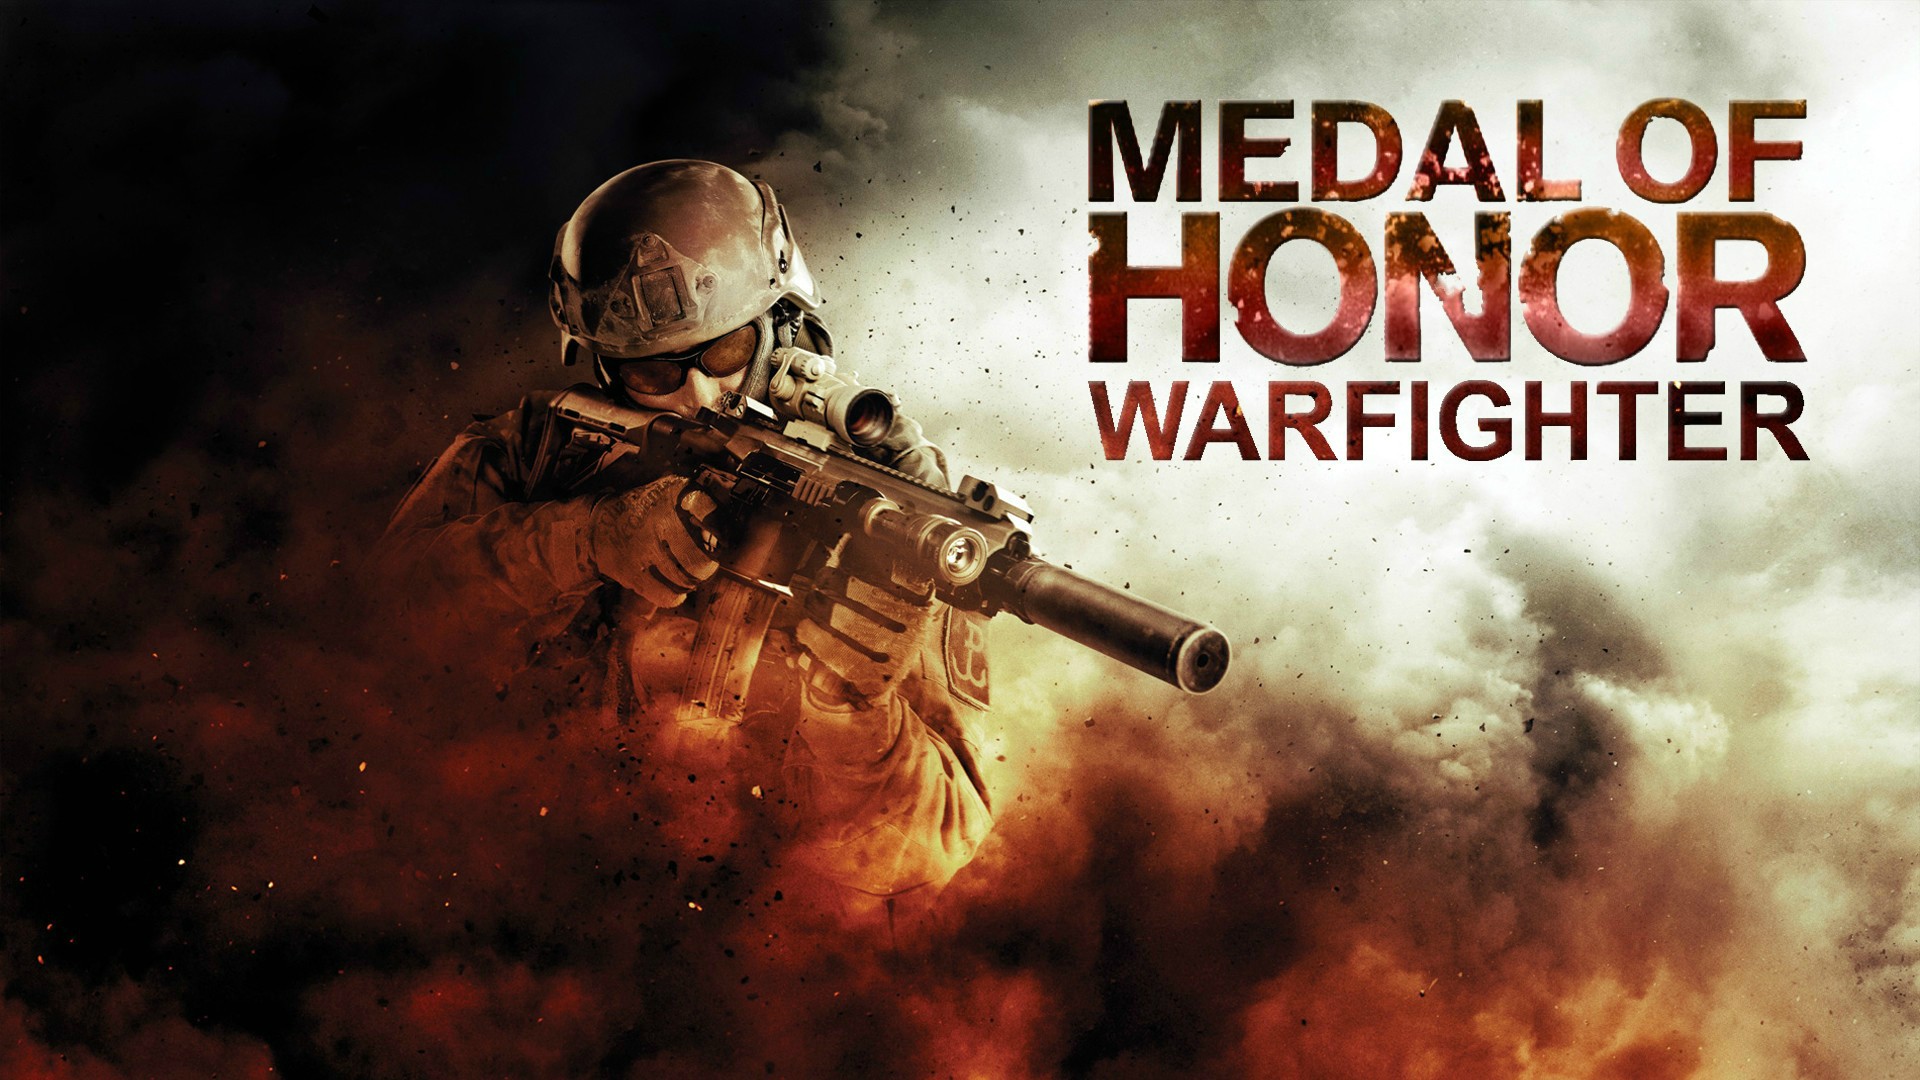 Video Game Medal Of Honor Warfighter 1920x1080